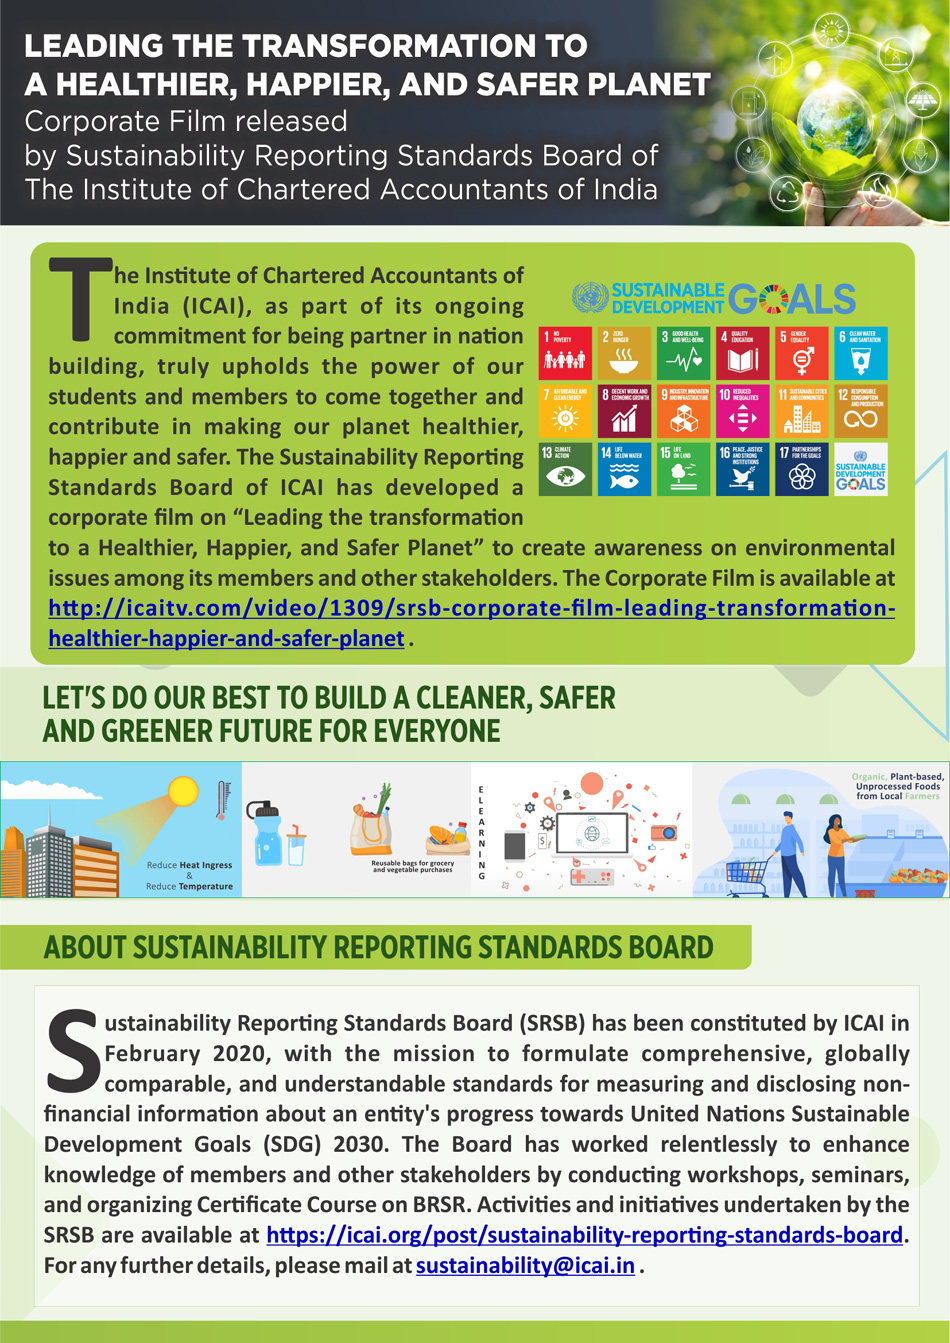 ICAI : Leading the transformation to a Healthier,Happier and Safer Planet